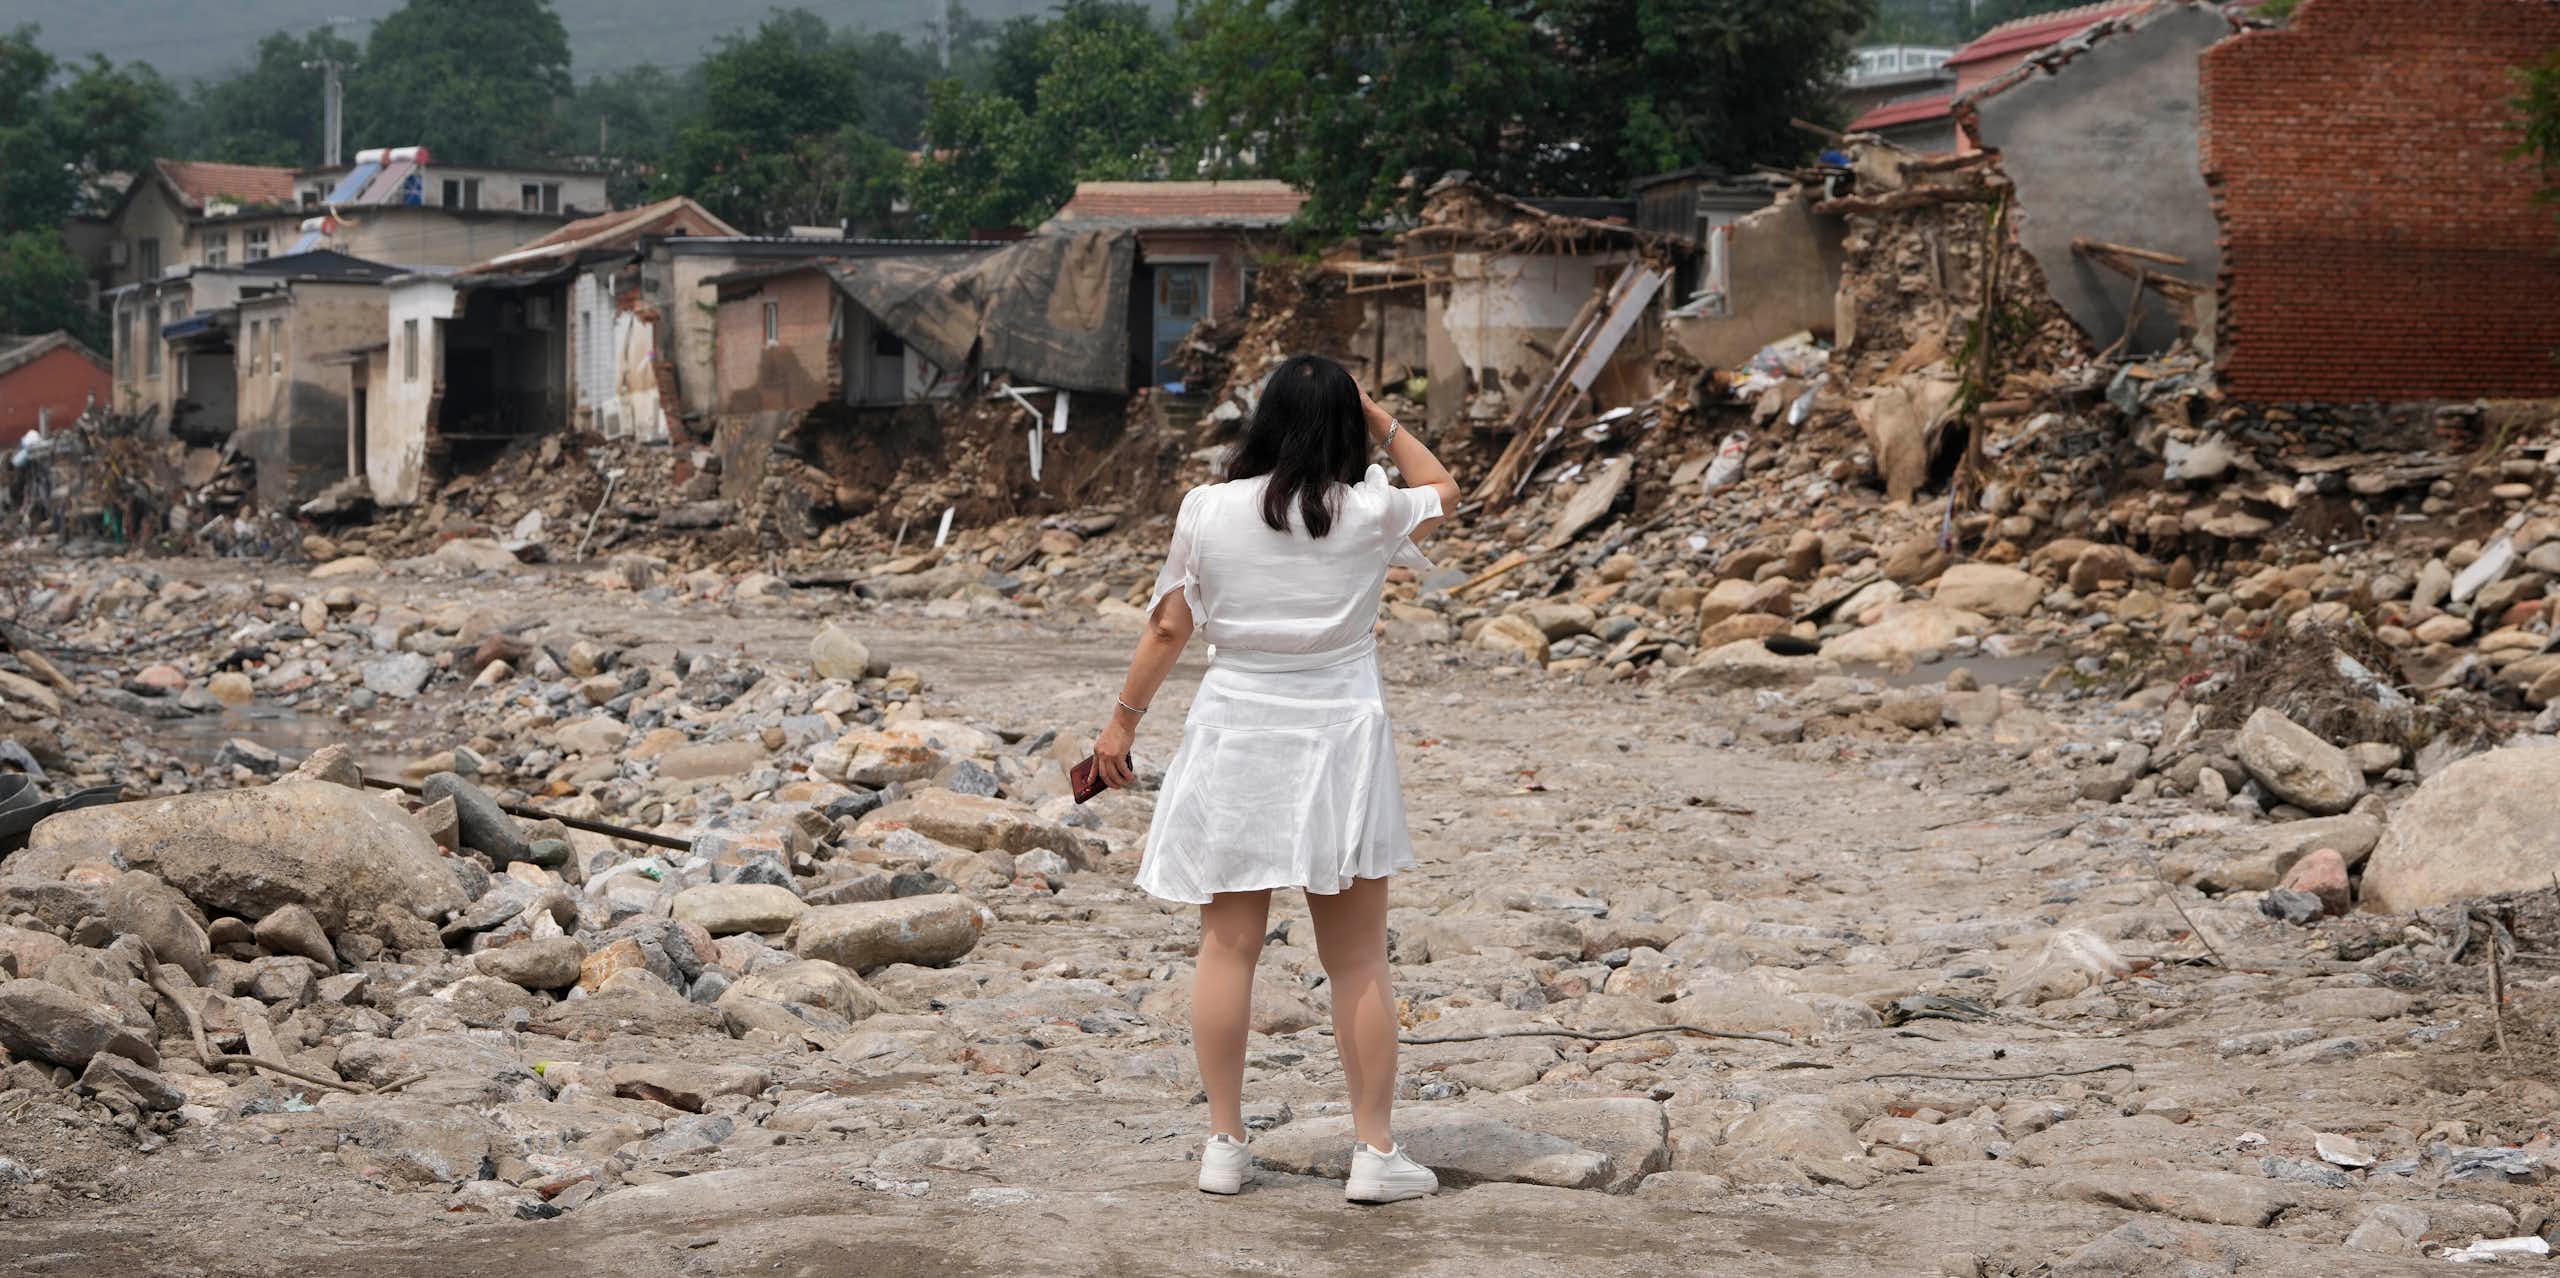 A woman in a white dress with her back to the camera stands in front of the wreckage of a row of houses